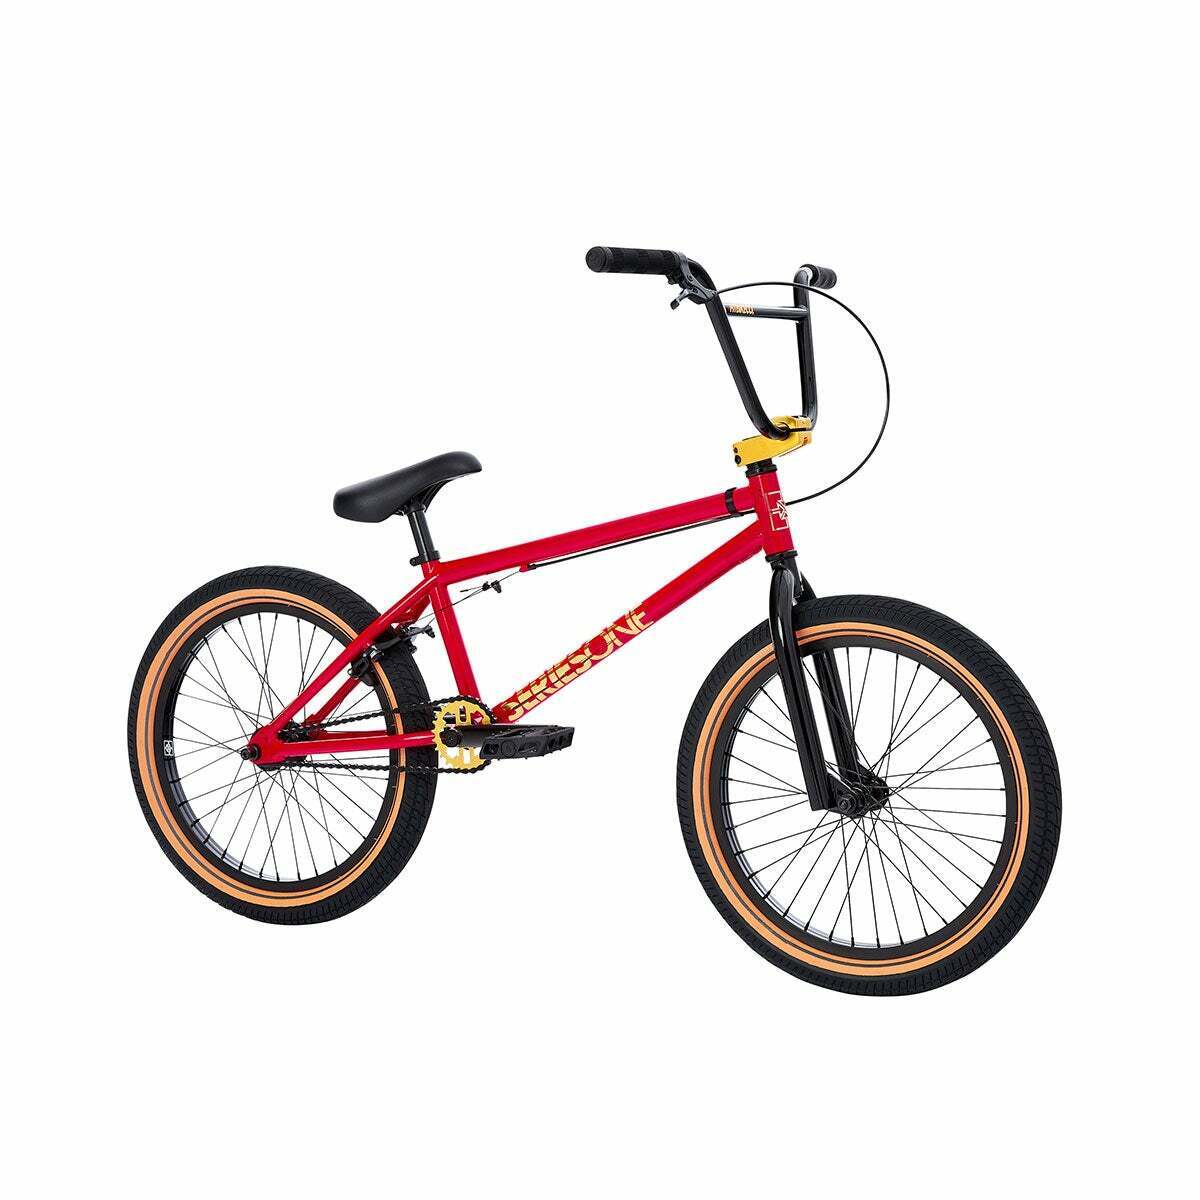 Bicycle for Sale: Fit 2021 Series One SM 20.25" Complete BMX Bike - Gloss Red in Vista, California